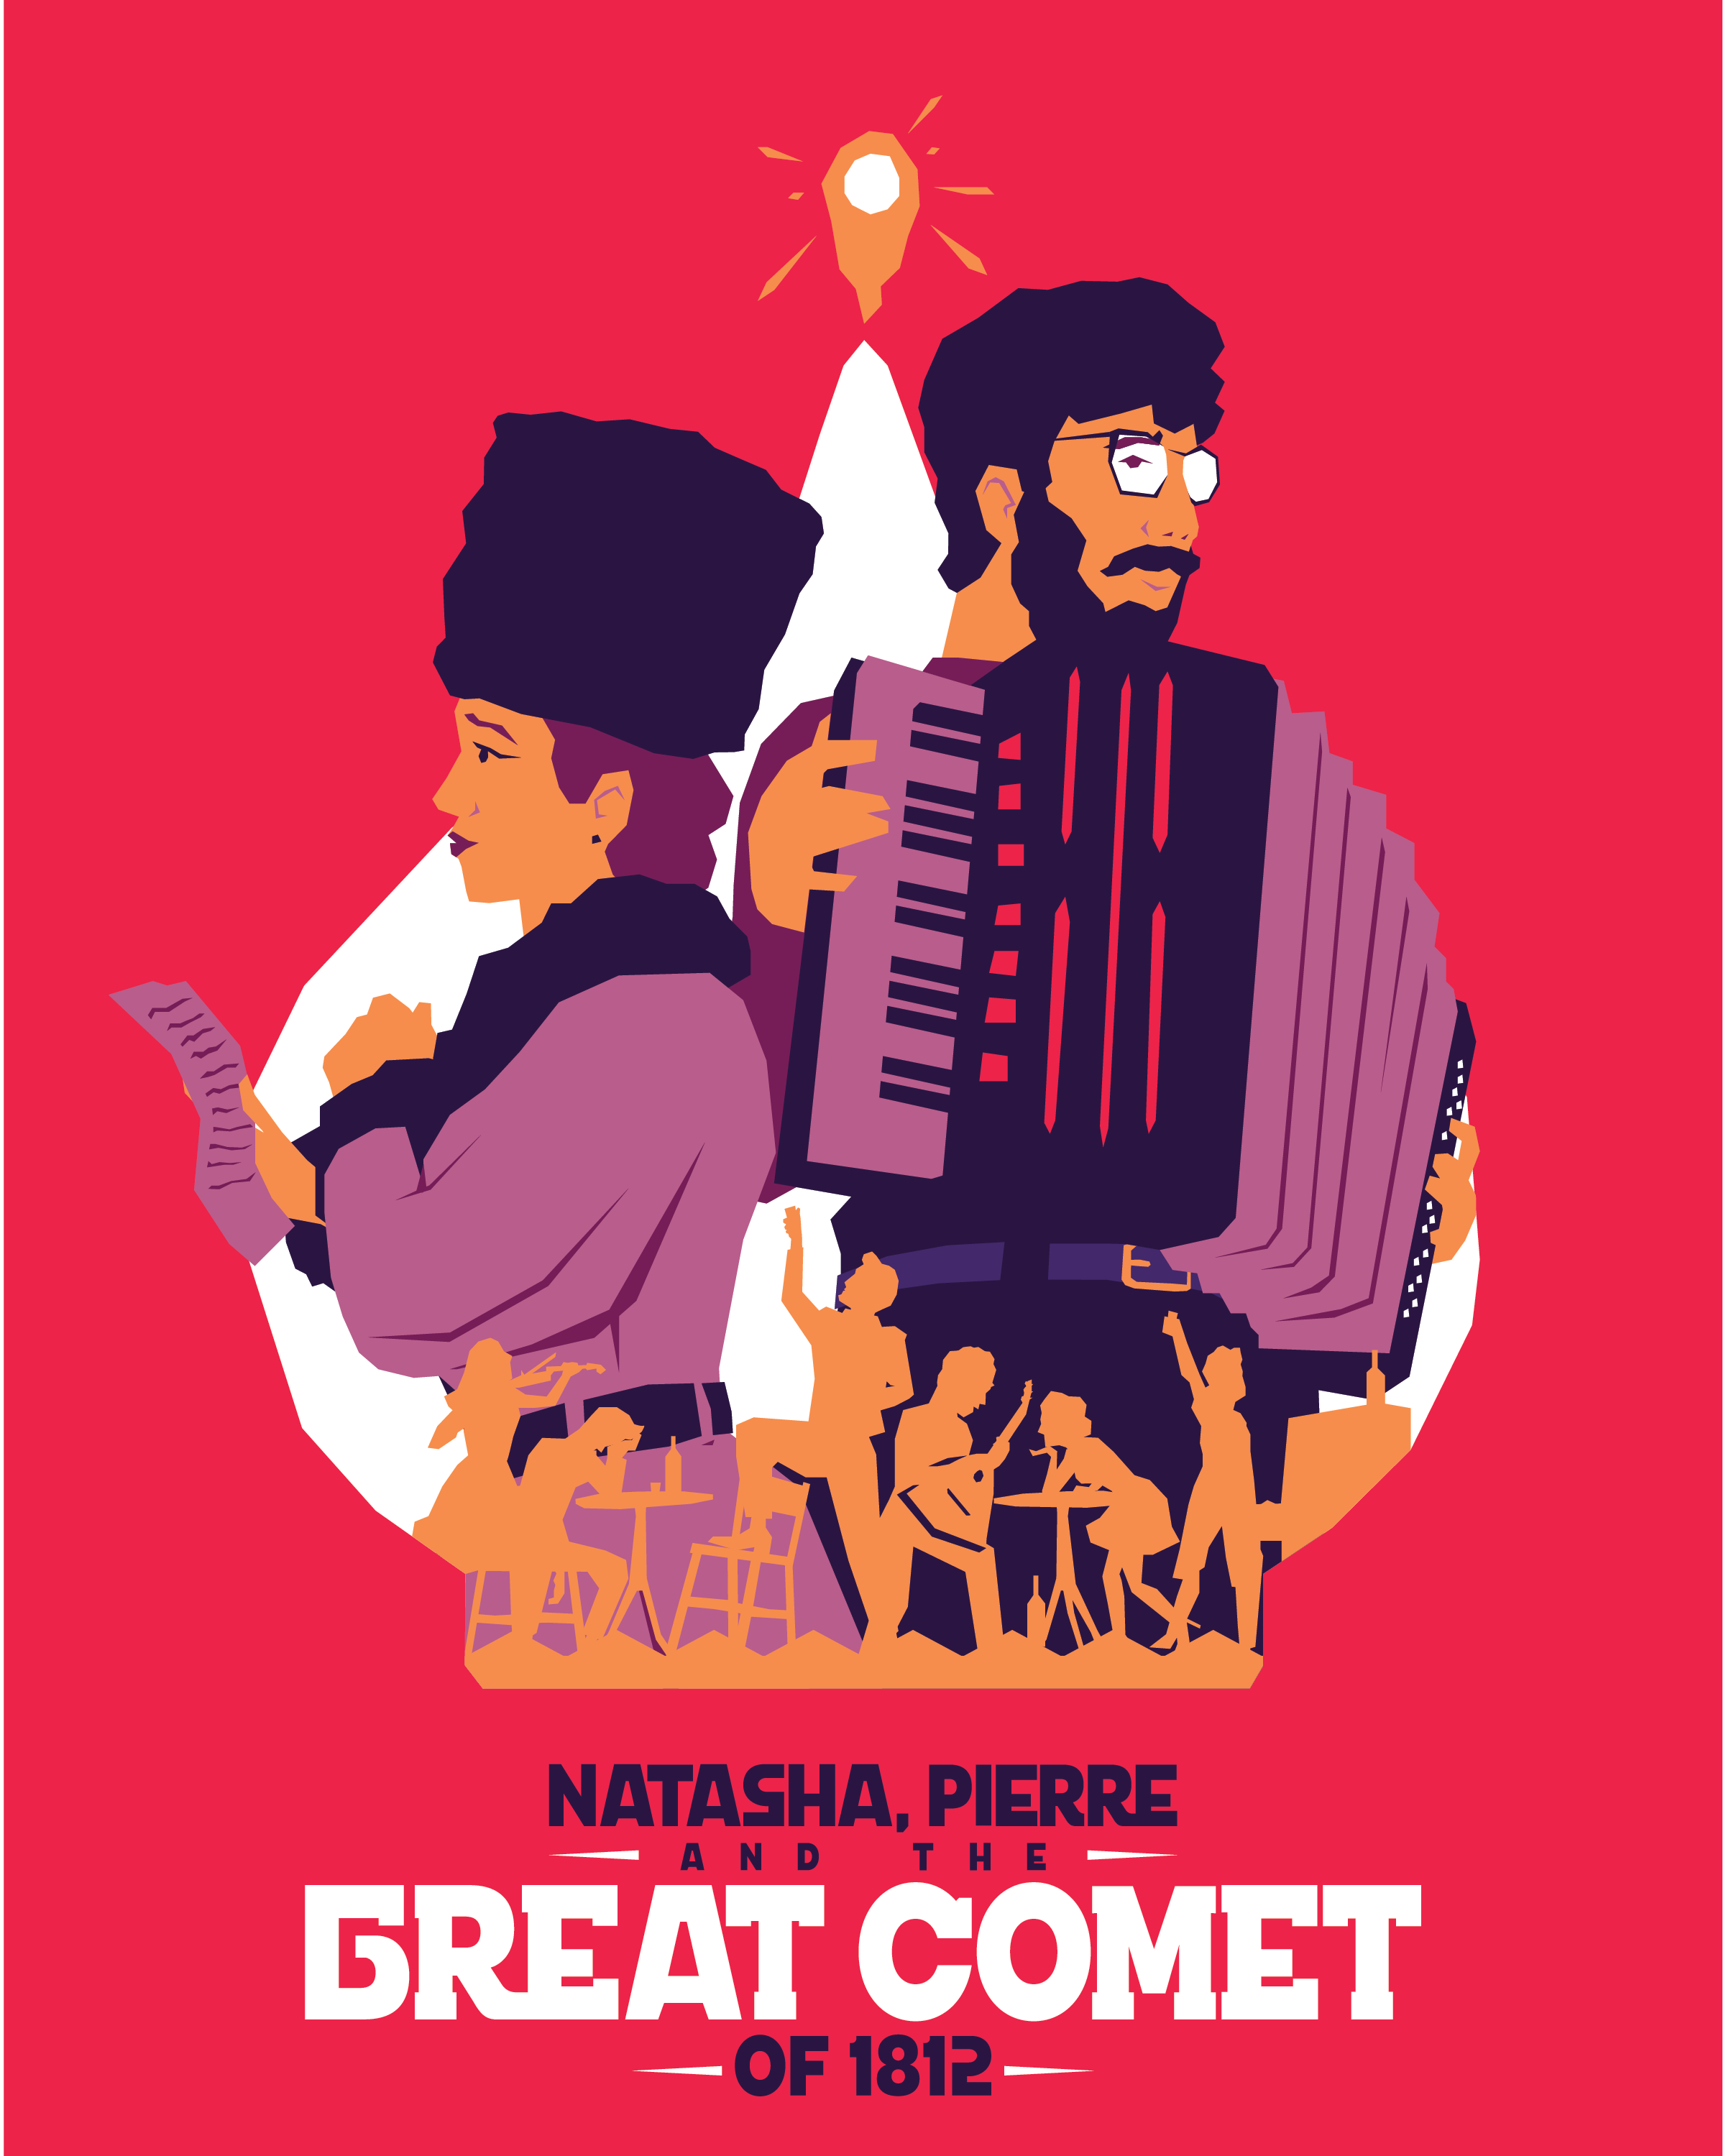 Natasha, Pierre, and the Great Comet of 1812 - Visual Identity and Branding